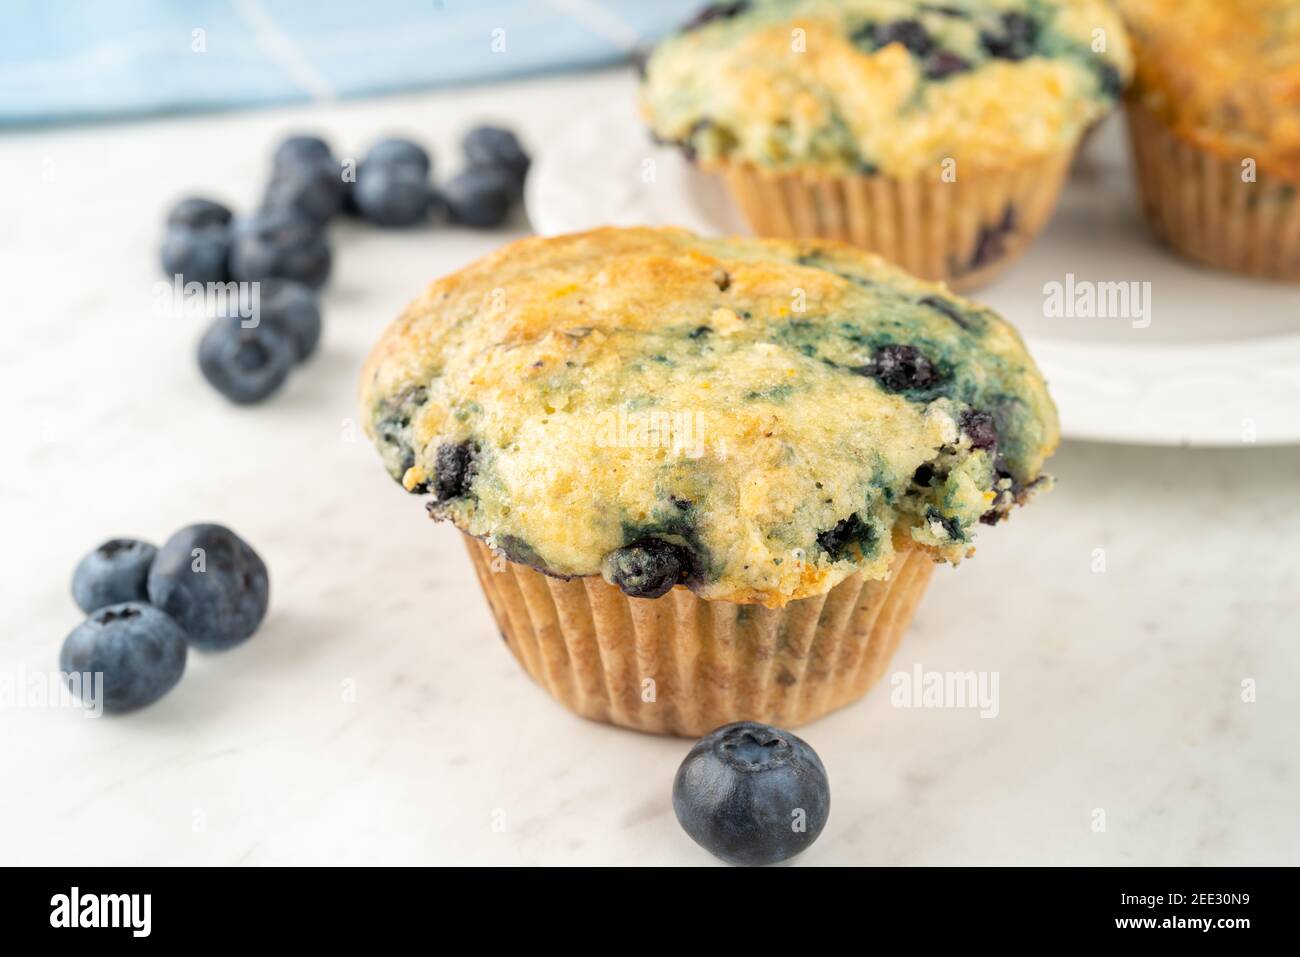 Homemade blueberry muffins freshly baked in the home kitchen. Stock Photo